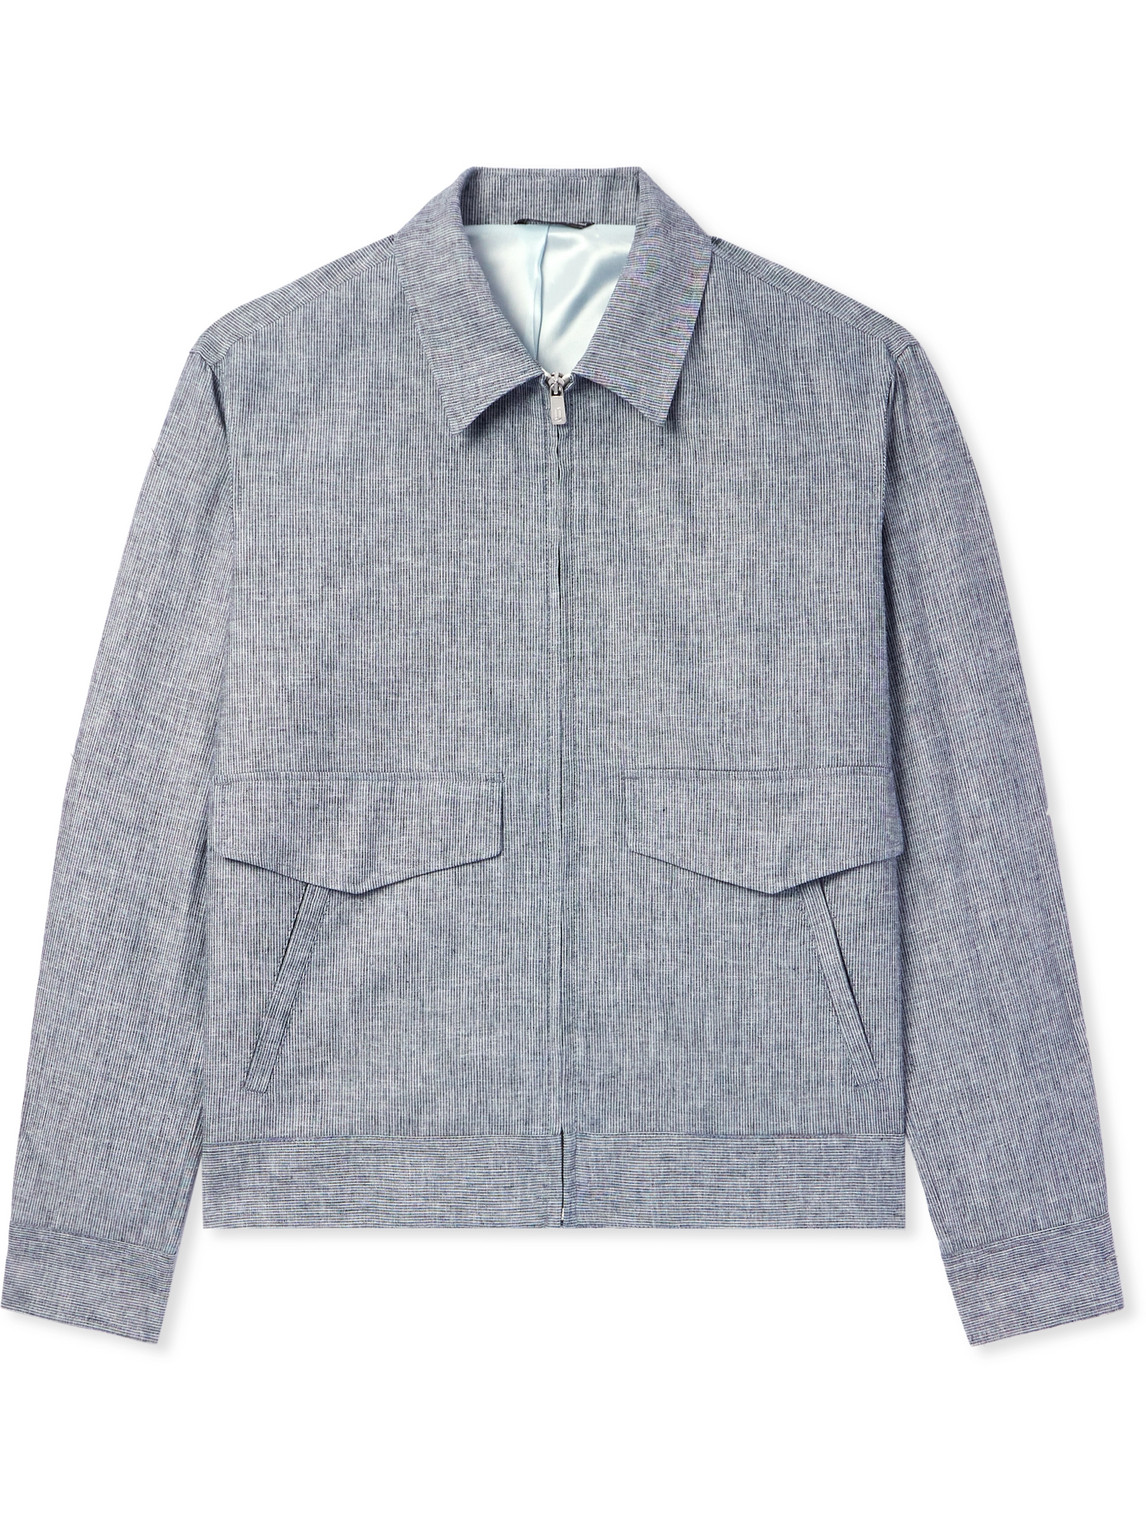 Richard James Striped Linen And Cotton-blend Blouson Jacket In Gray